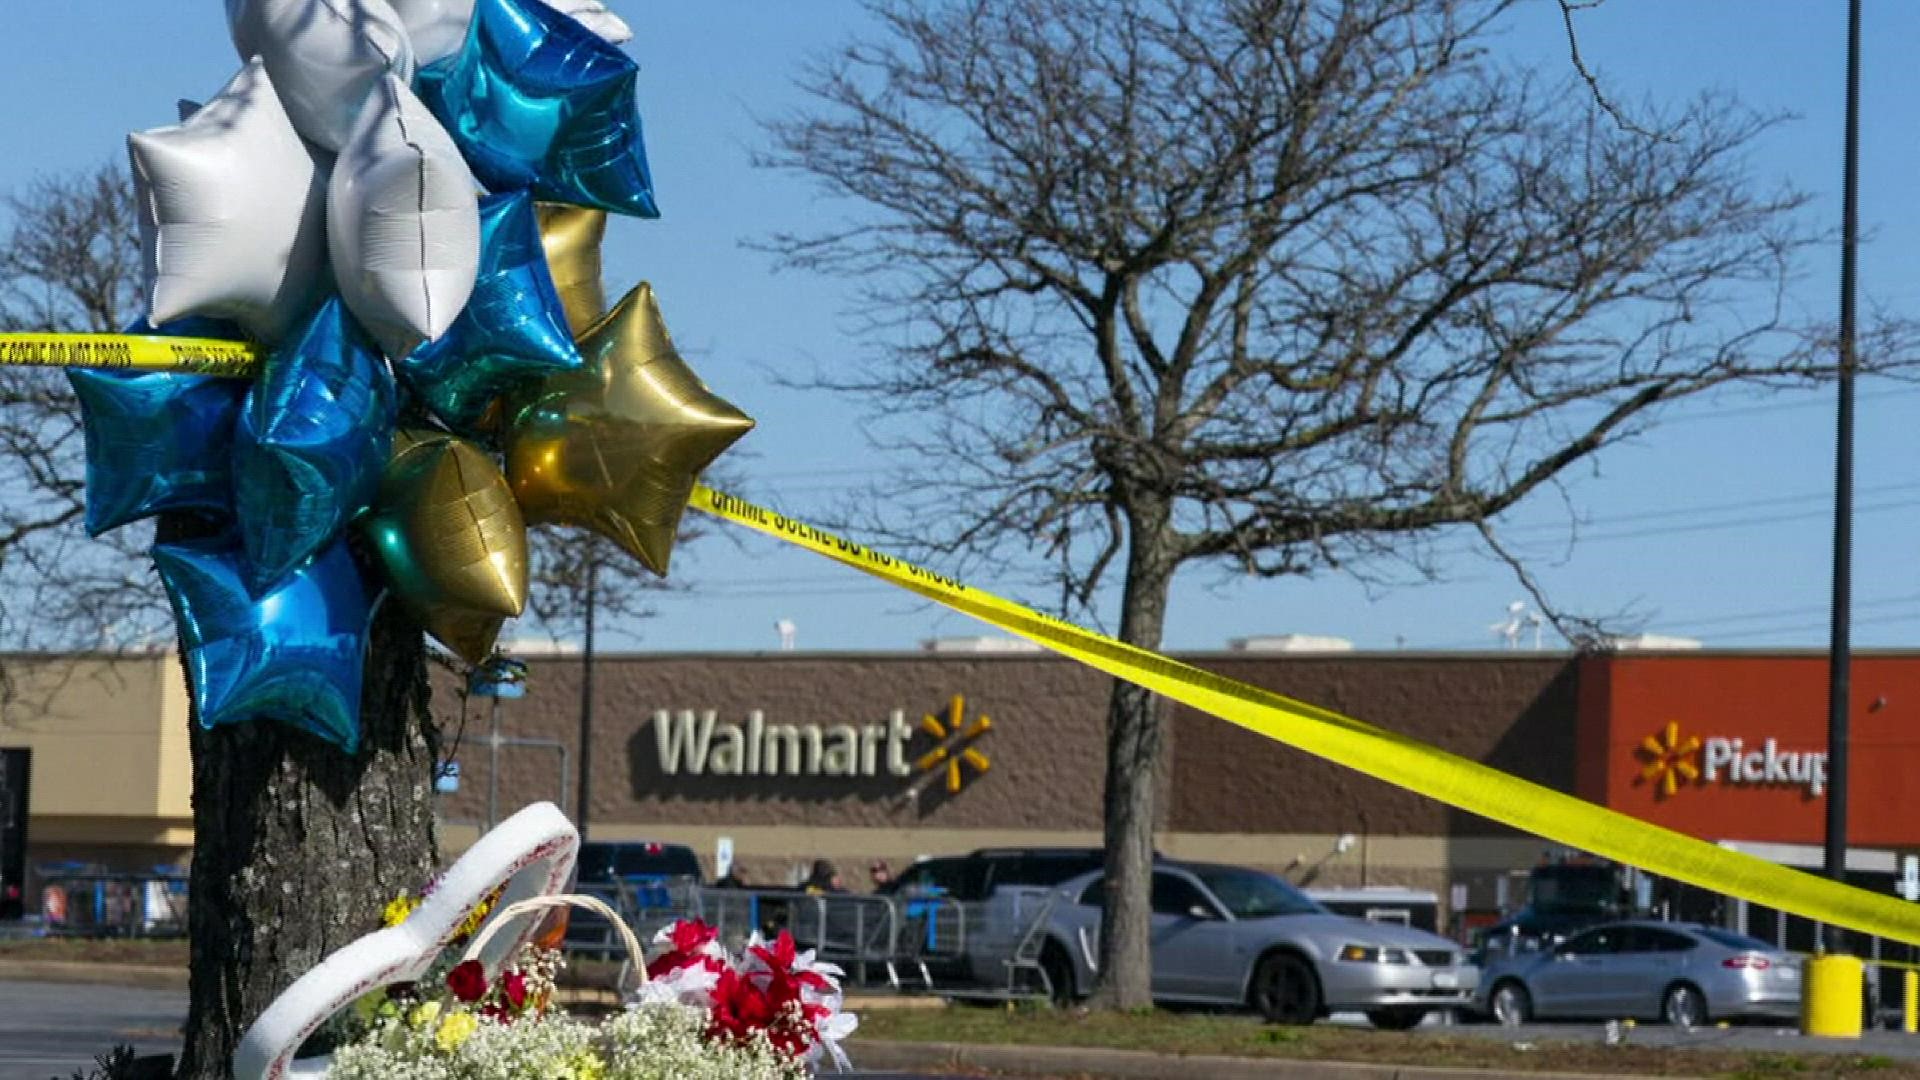 One survivor said her life was spared because she'd only been working at that Walmart for five days when her manager allegedly went on a shooting spree.